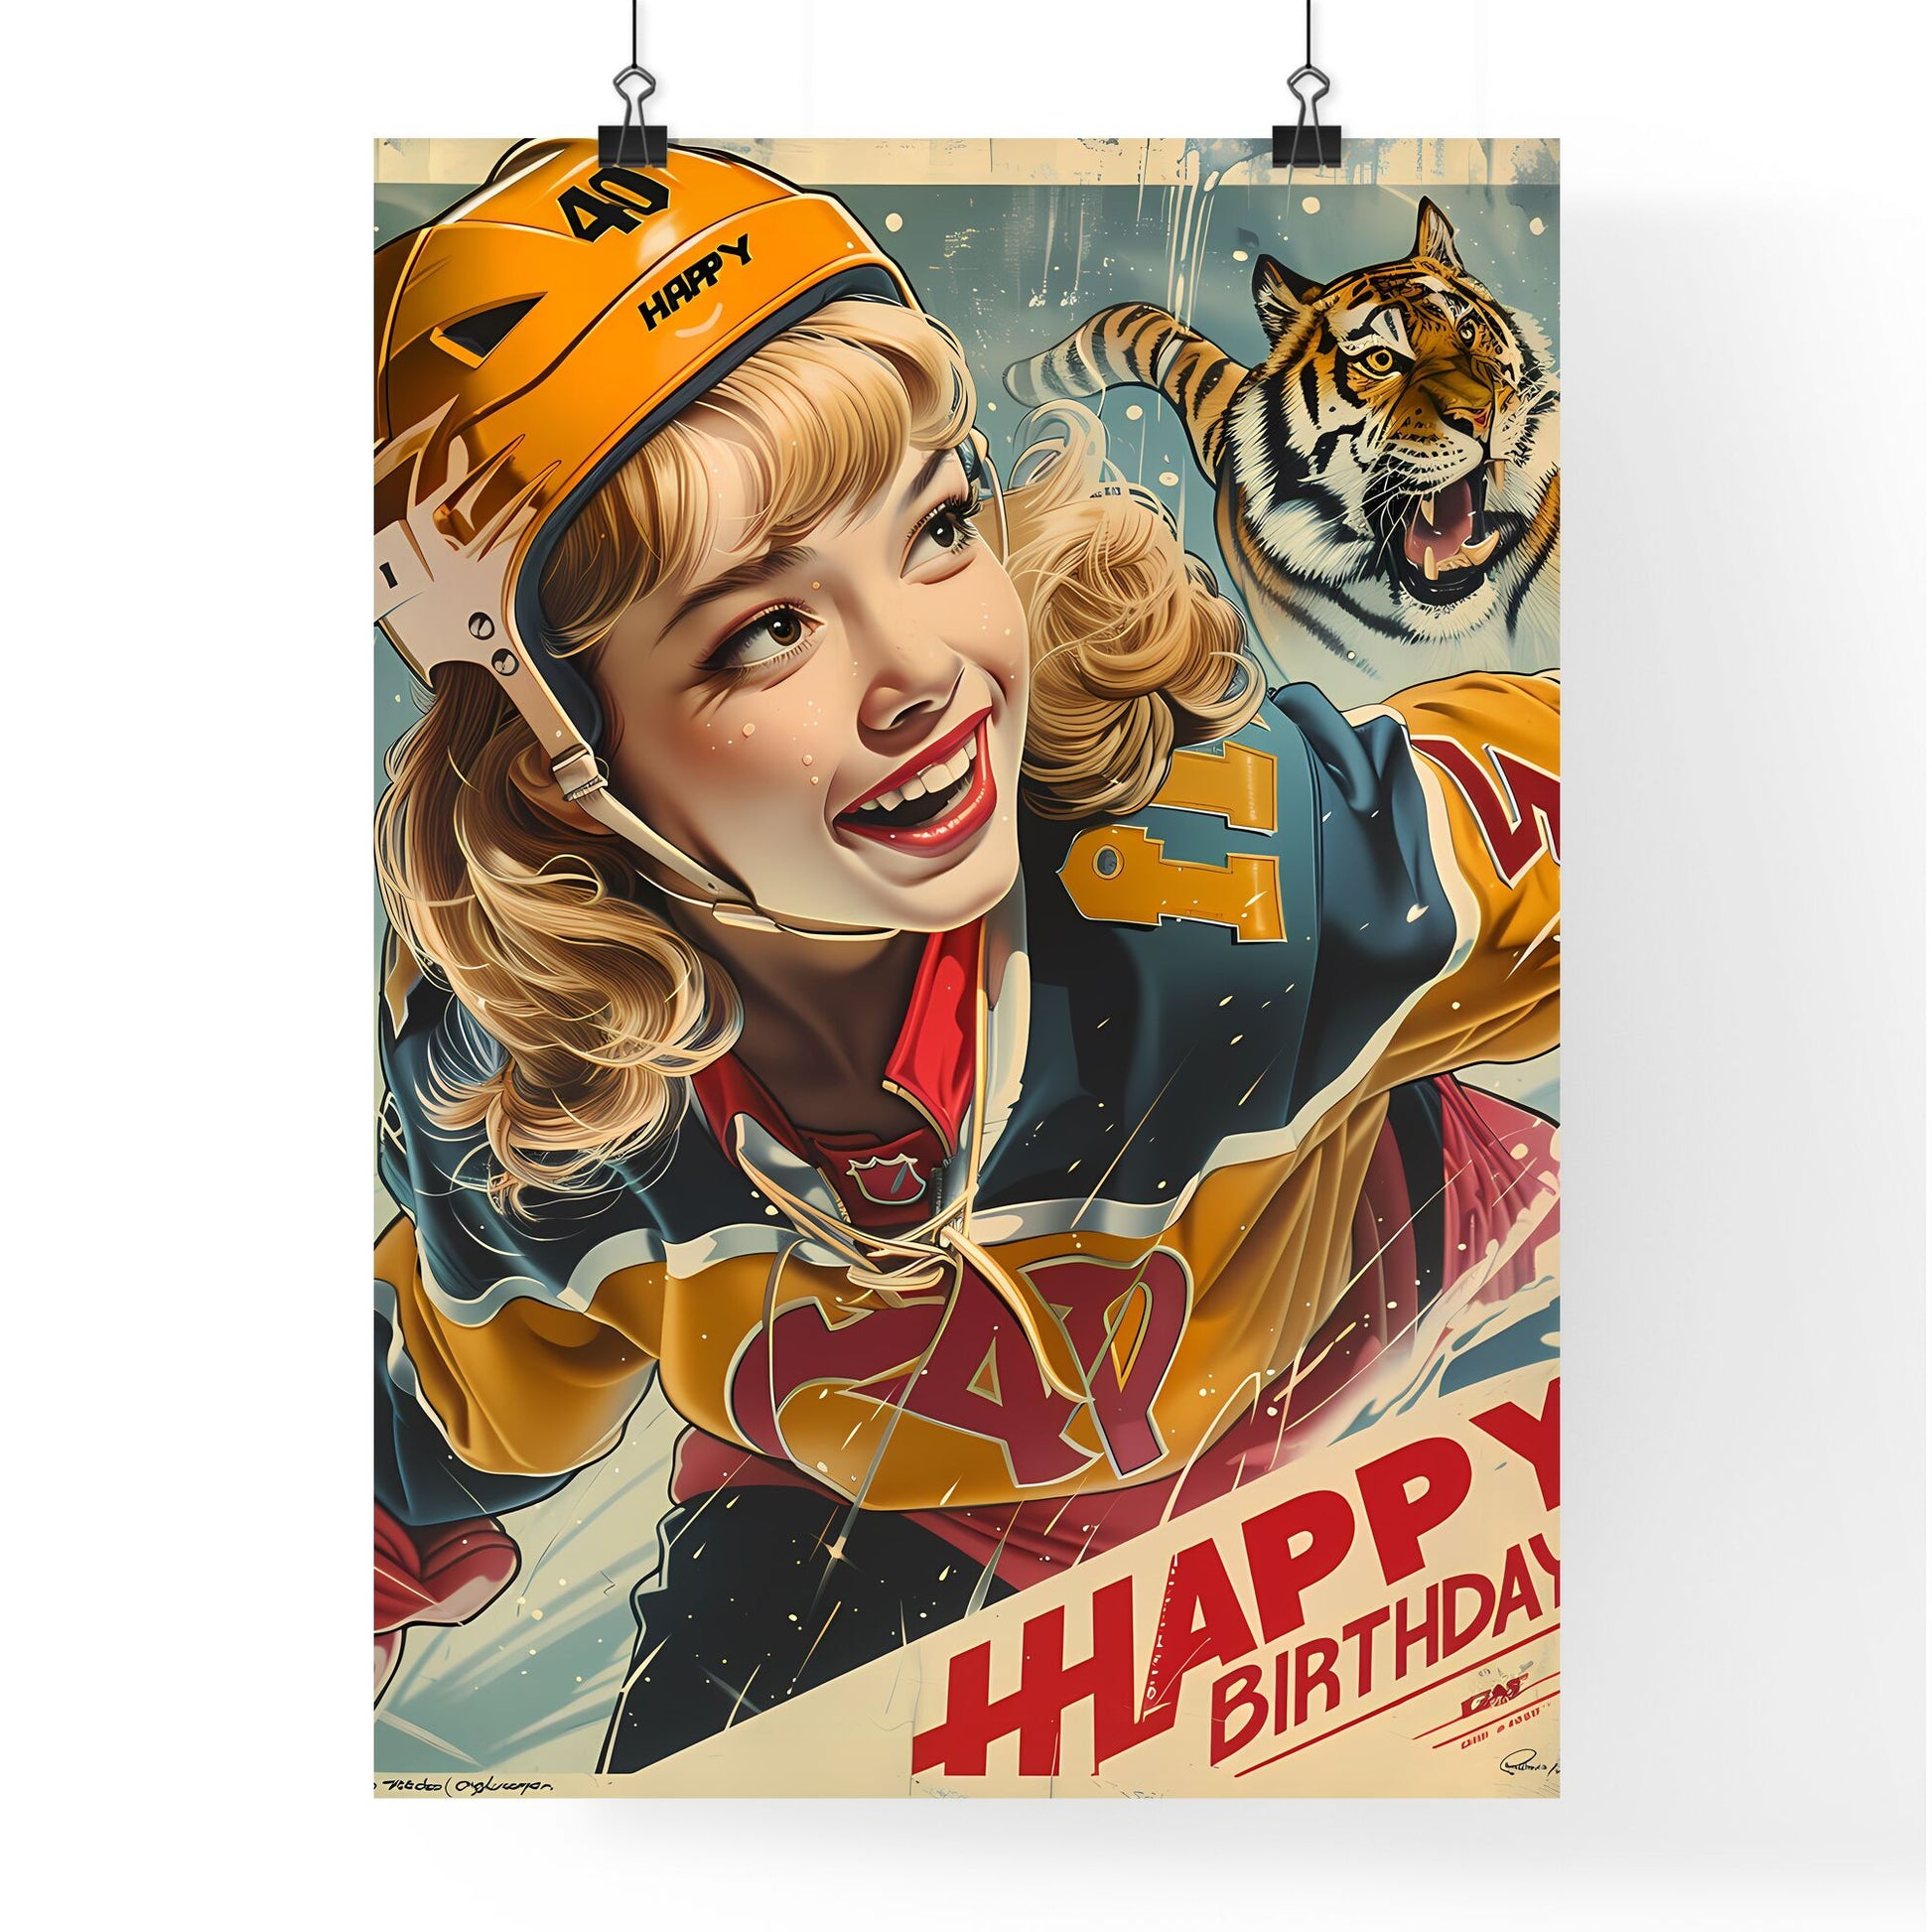 1960s Vintage Advertising: Happy Birthday Packaging with Blonde Princess, Ice Hockey, & Flying Tiger Default Title